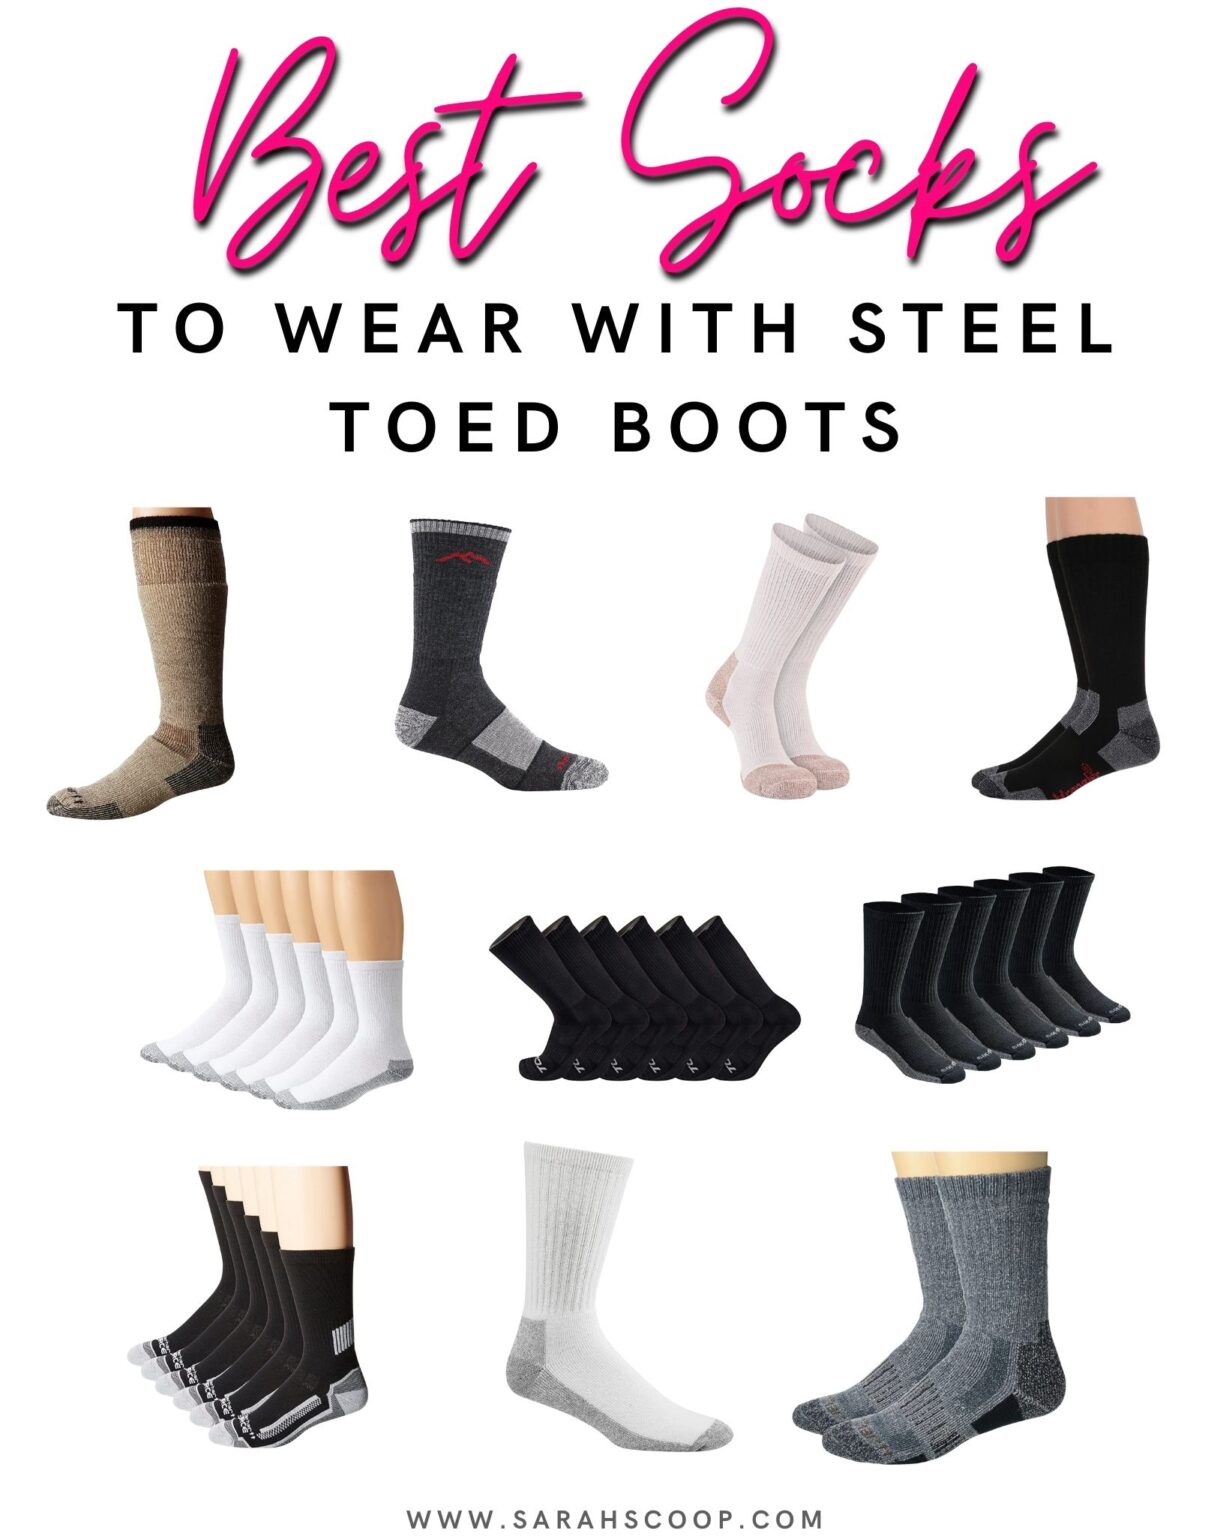 10 Best Socks to Wear With Steel Toed Boots | Sarah Scoop